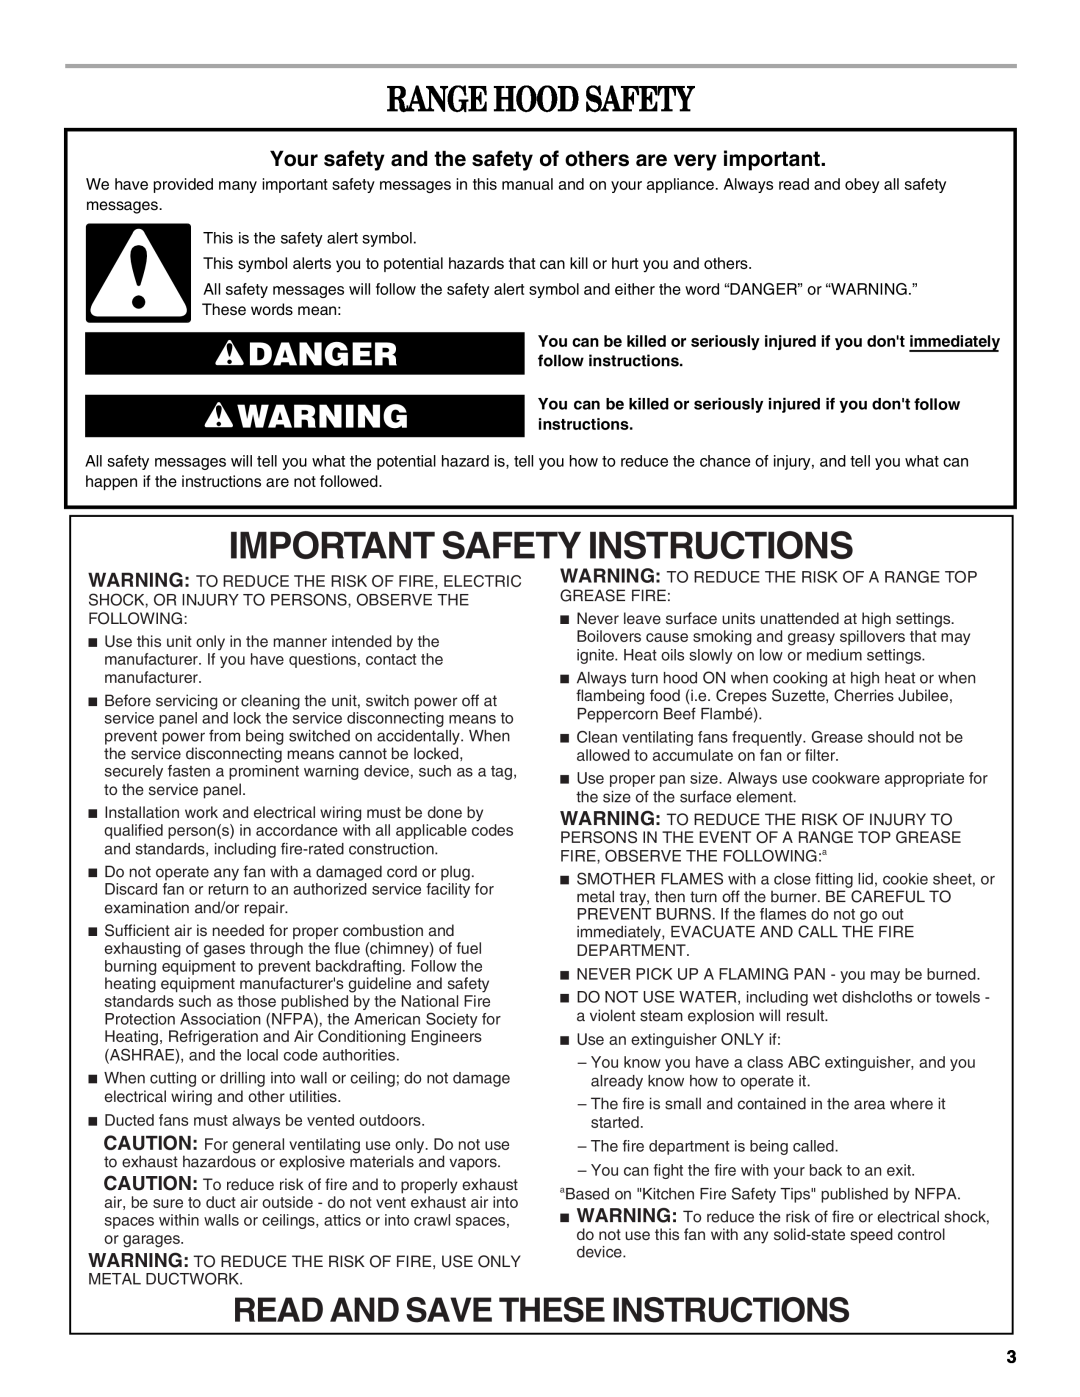 Whirlpool GXU7130DXS Important Safety Instructions, Range Hood Safety, Read And Save These Instructions, Danger 